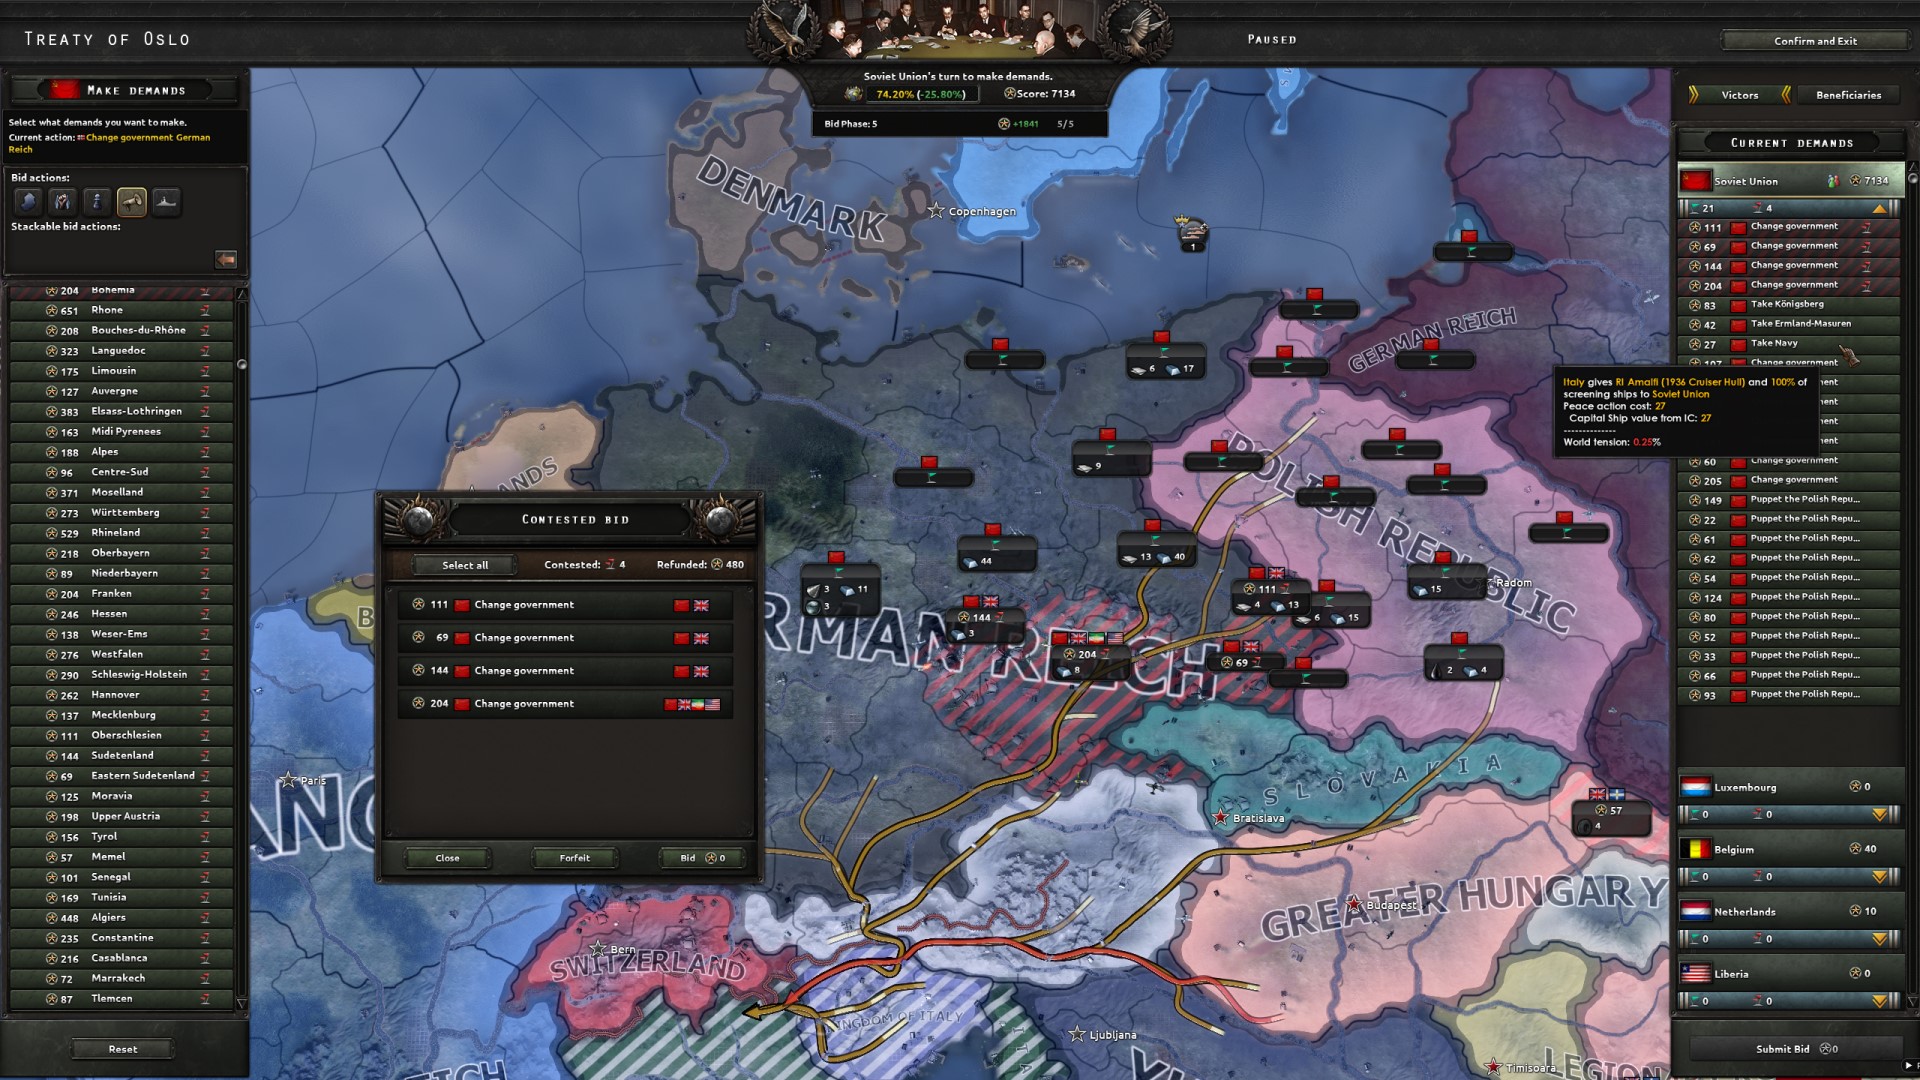 This is one reason why I love HOI4